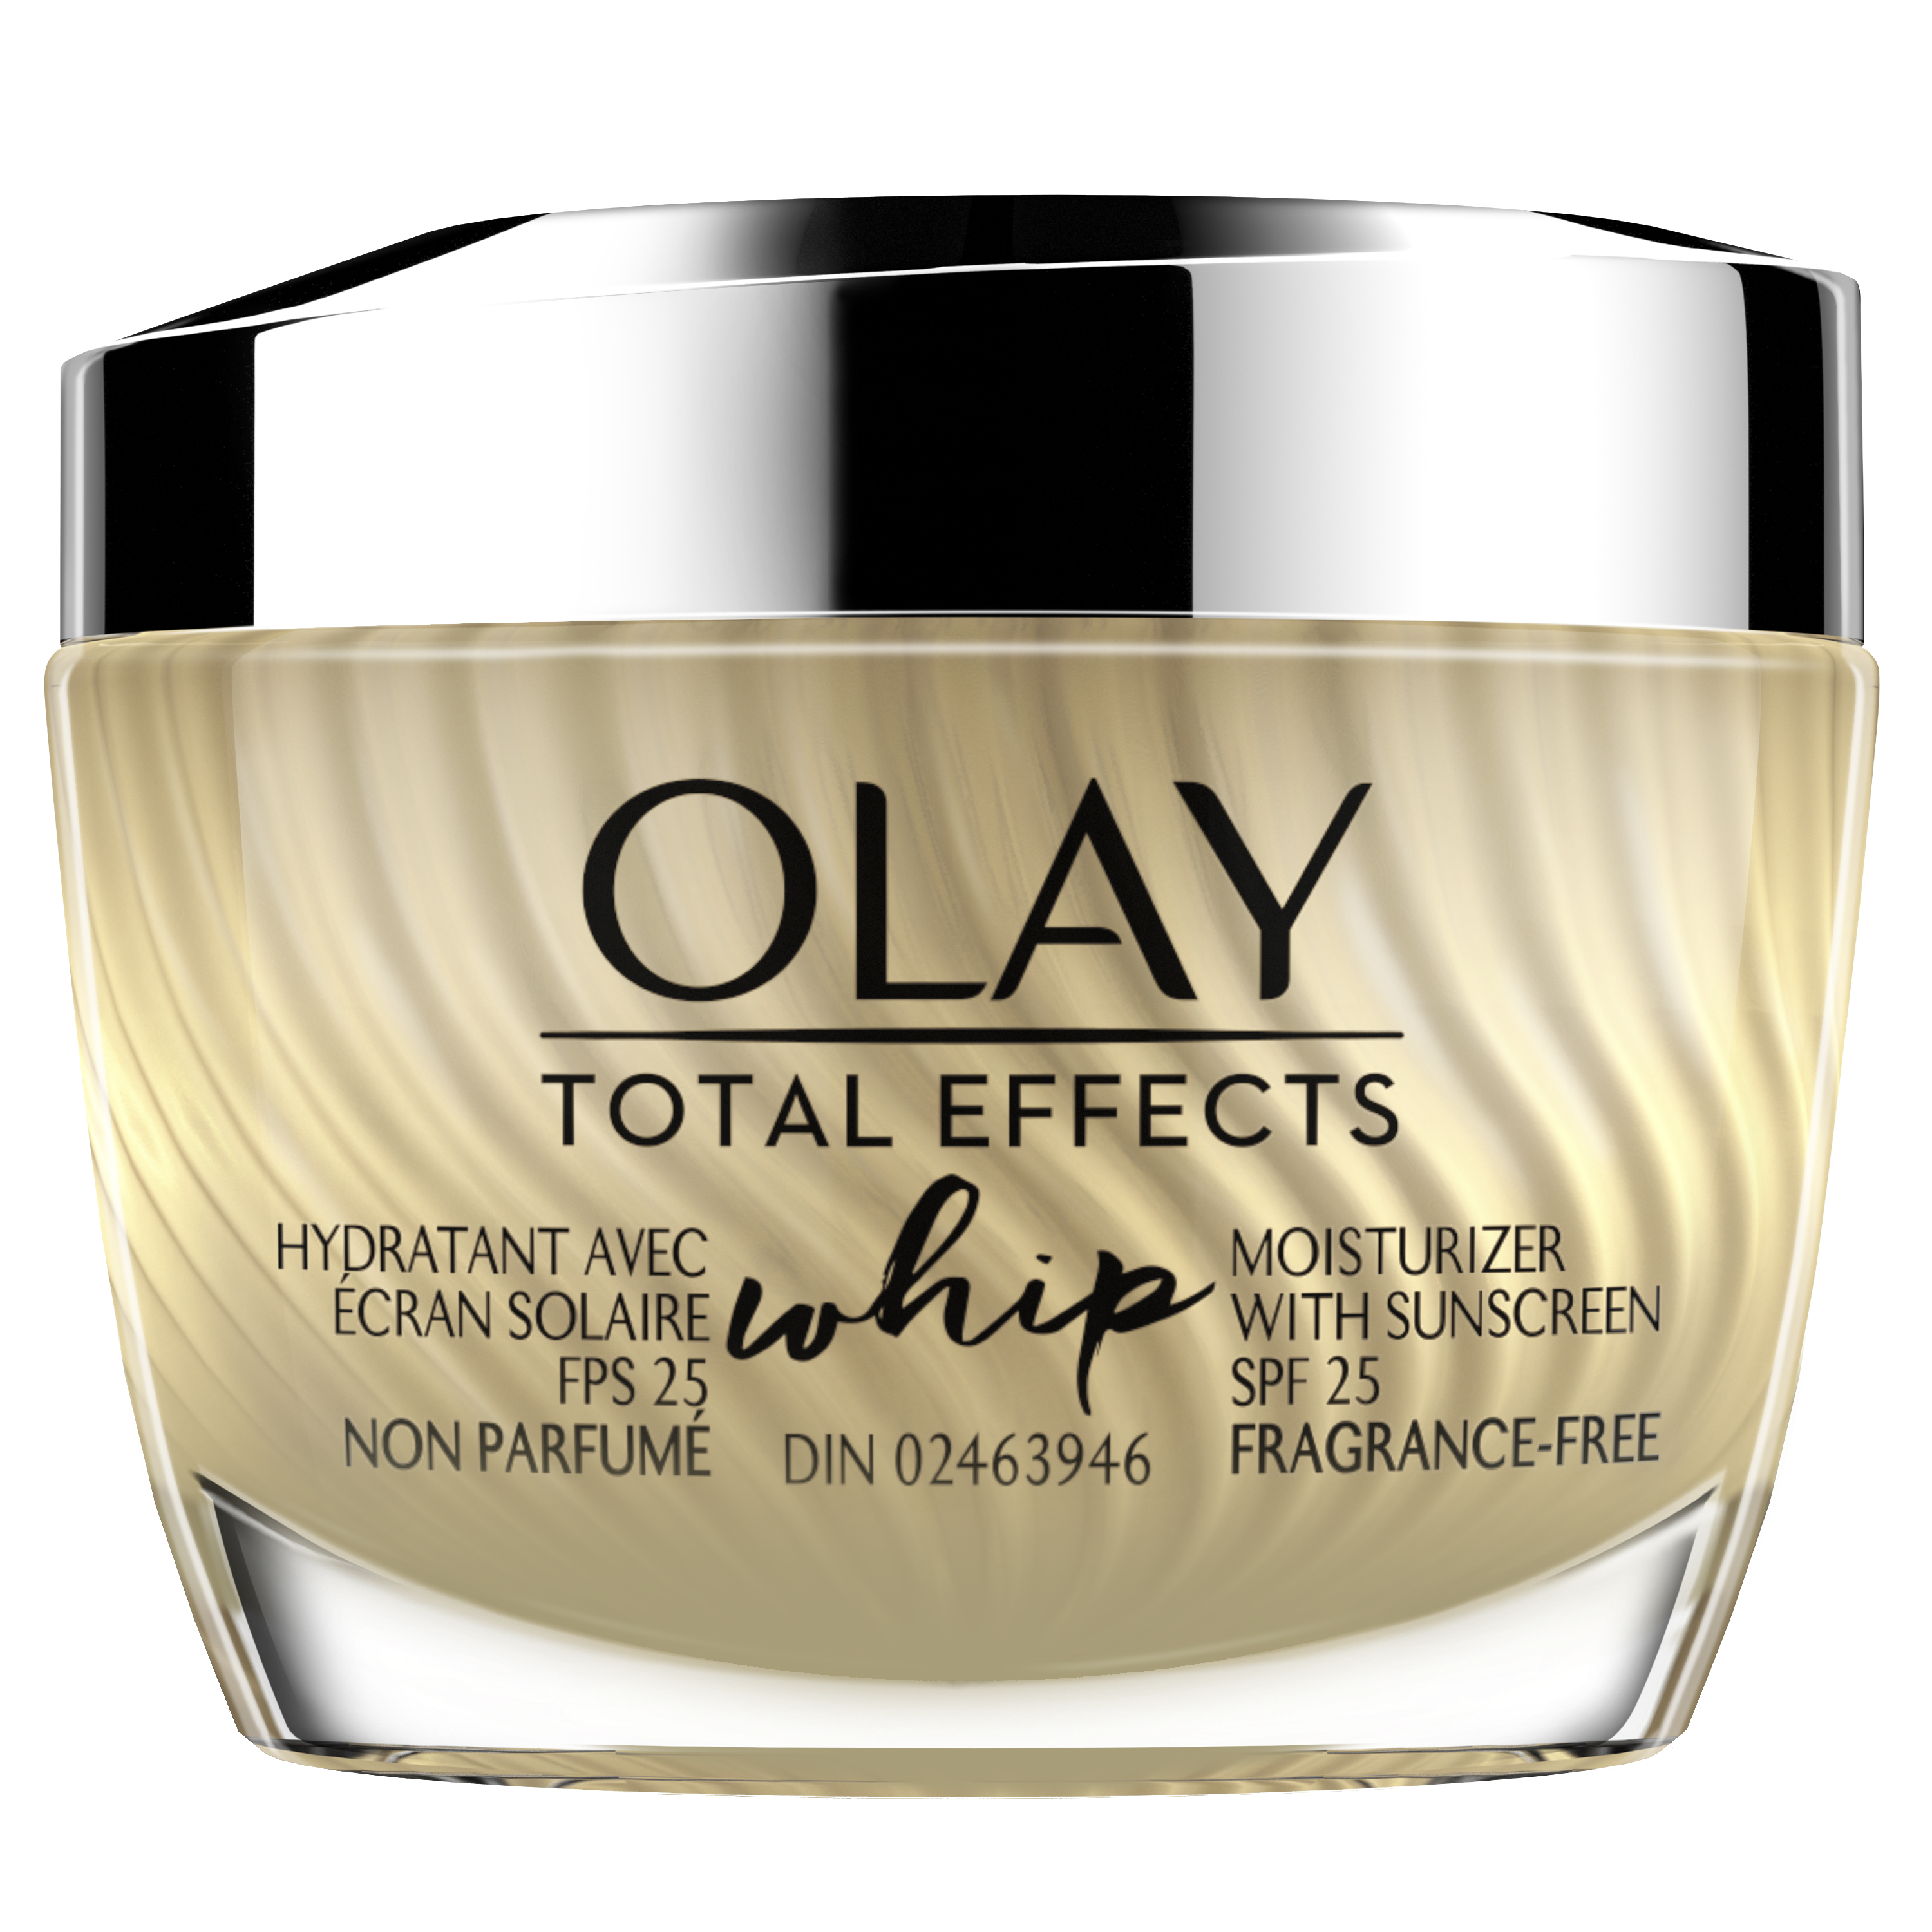 Olay Total Effects Whip Face Moisturizer SPF 25 Fragrance Free 50 ml